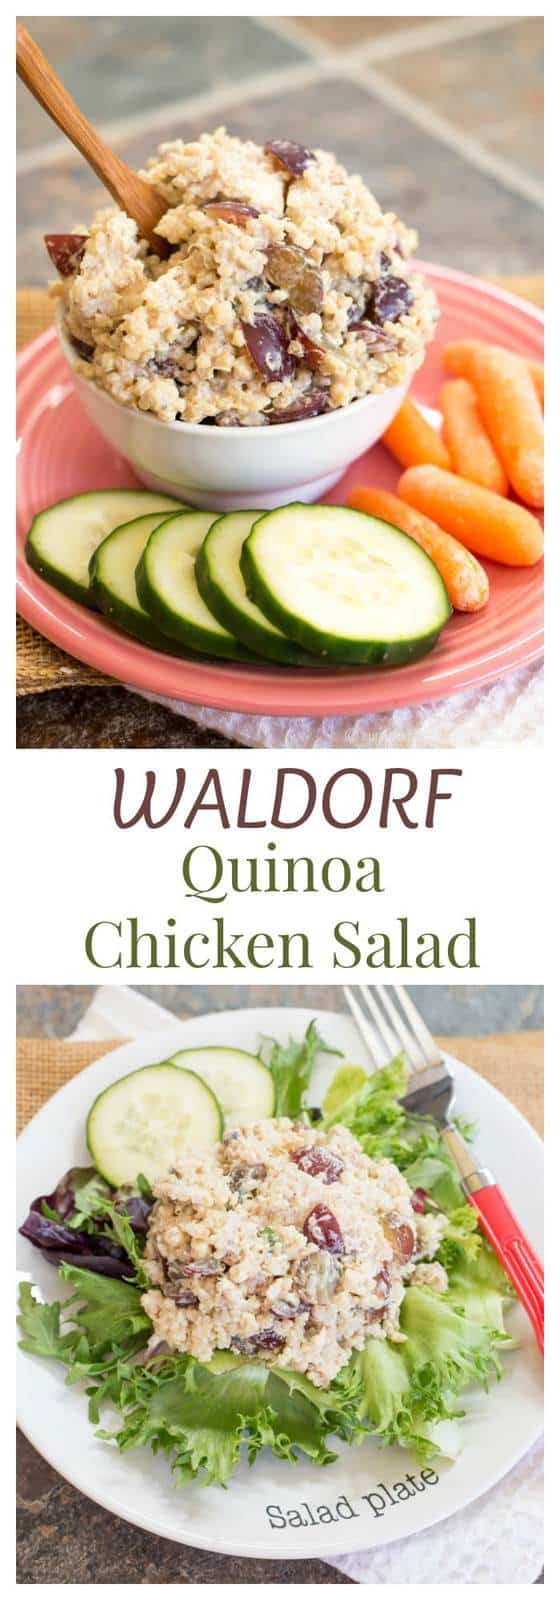 Waldorf Quinoa Chicken Salad - a simple, healthy, and protein-packed combination with sweet juicy grapes and crunchy walnuts. Make it for an easy summer dinner or lunches all week | cupcakesandkalechips.com | gluten free recipe 